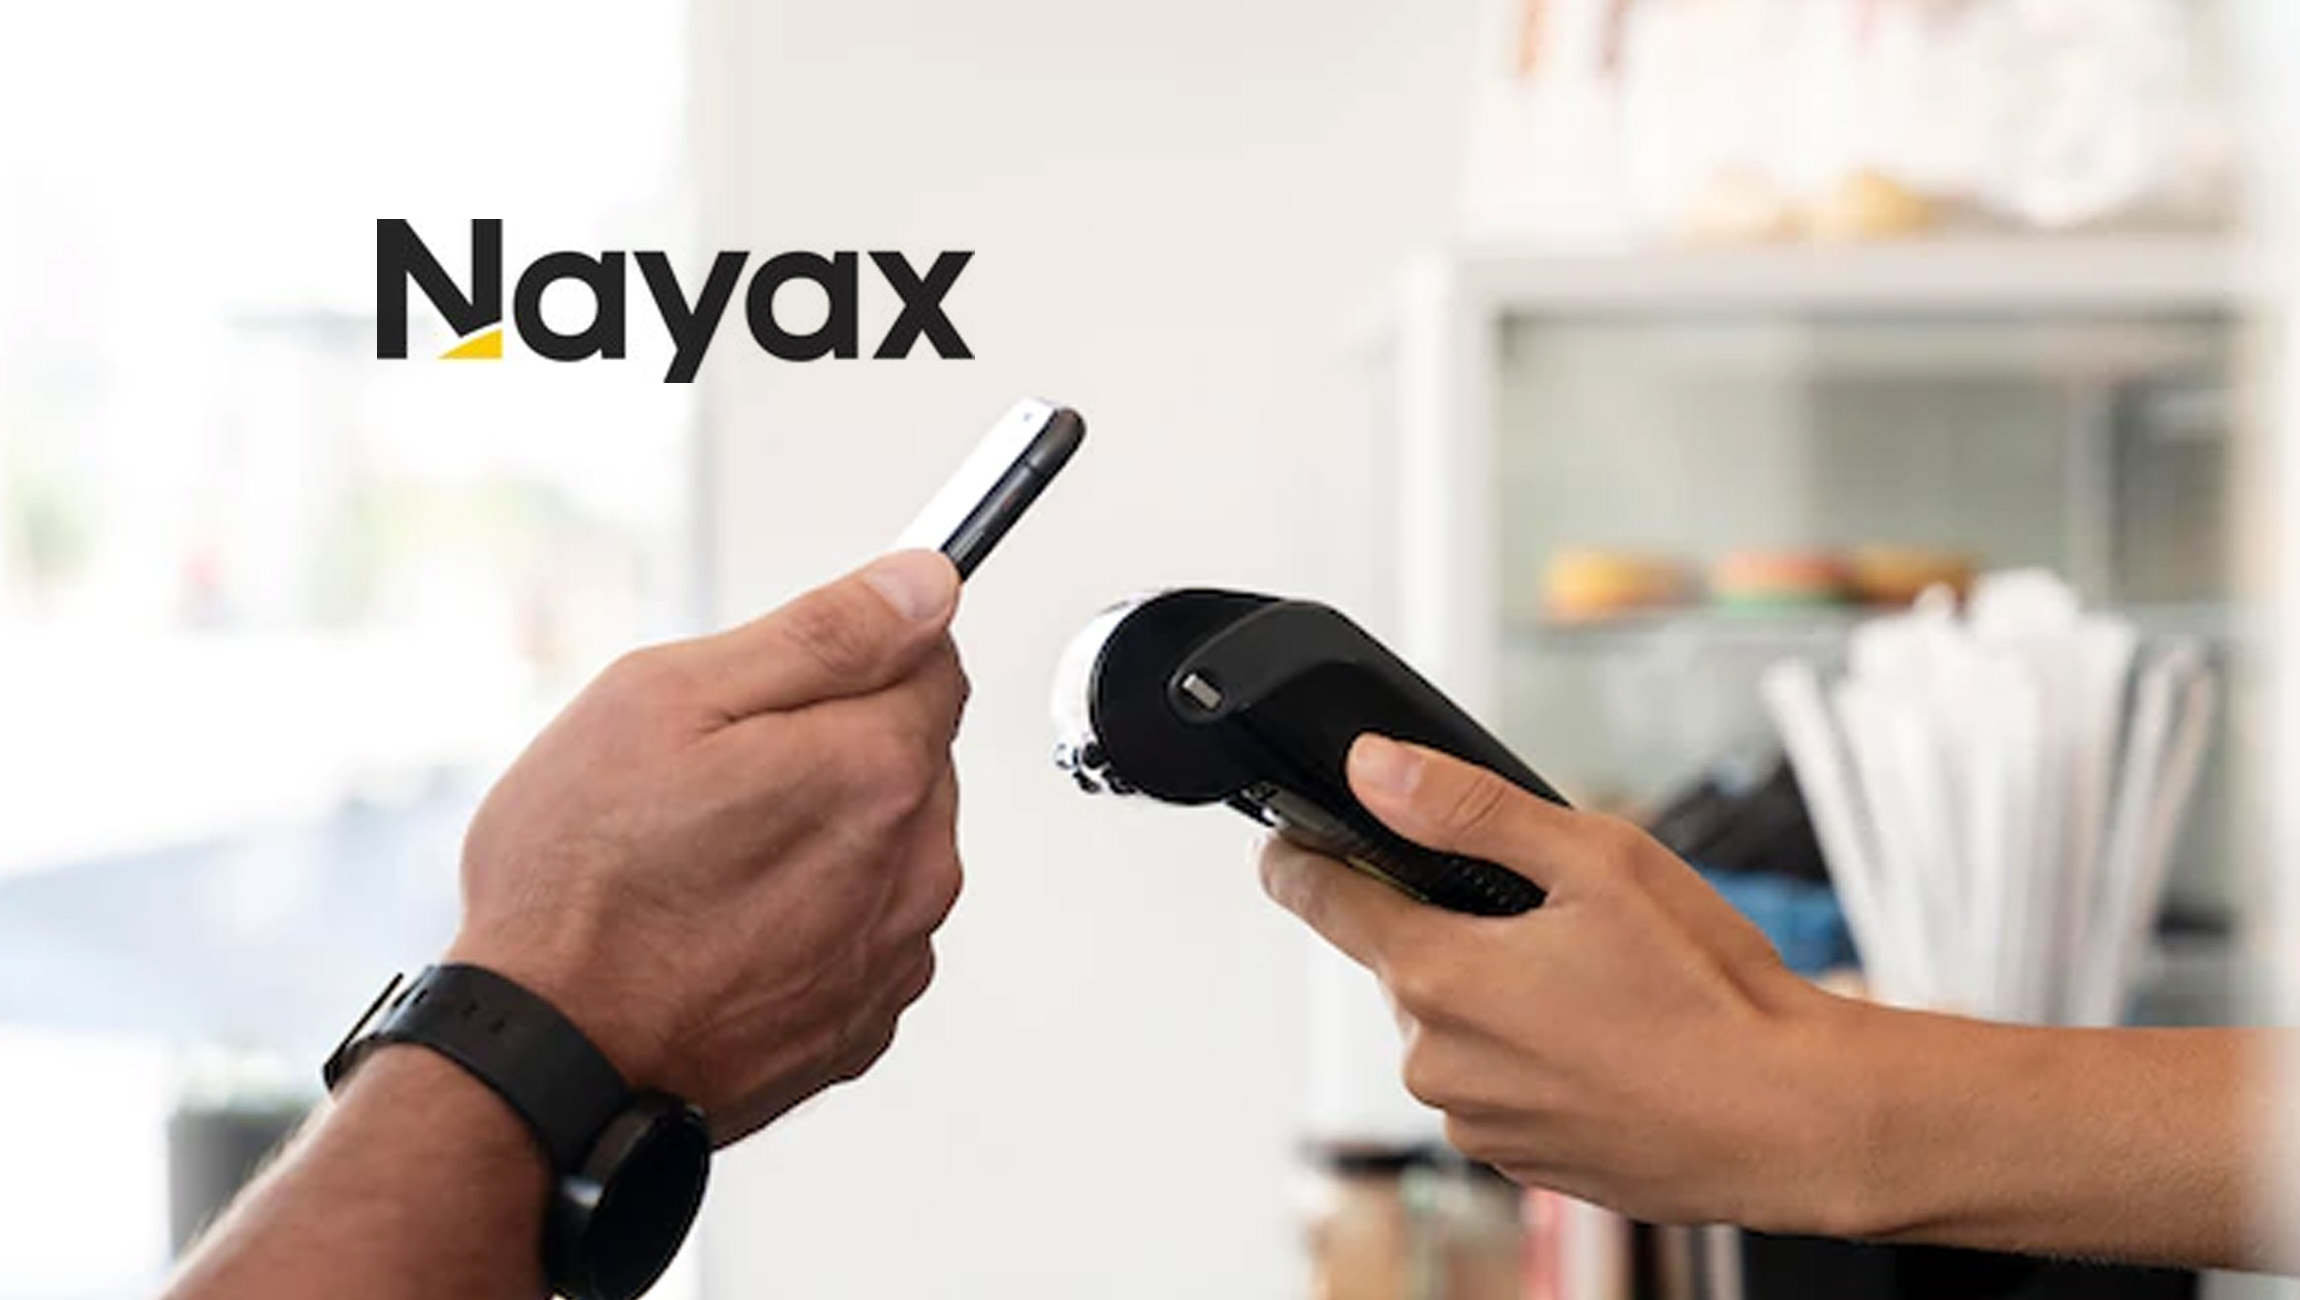 Nayax Is Taking Another Step to Help Better Communities by Offering its Customers a Way to Give Back